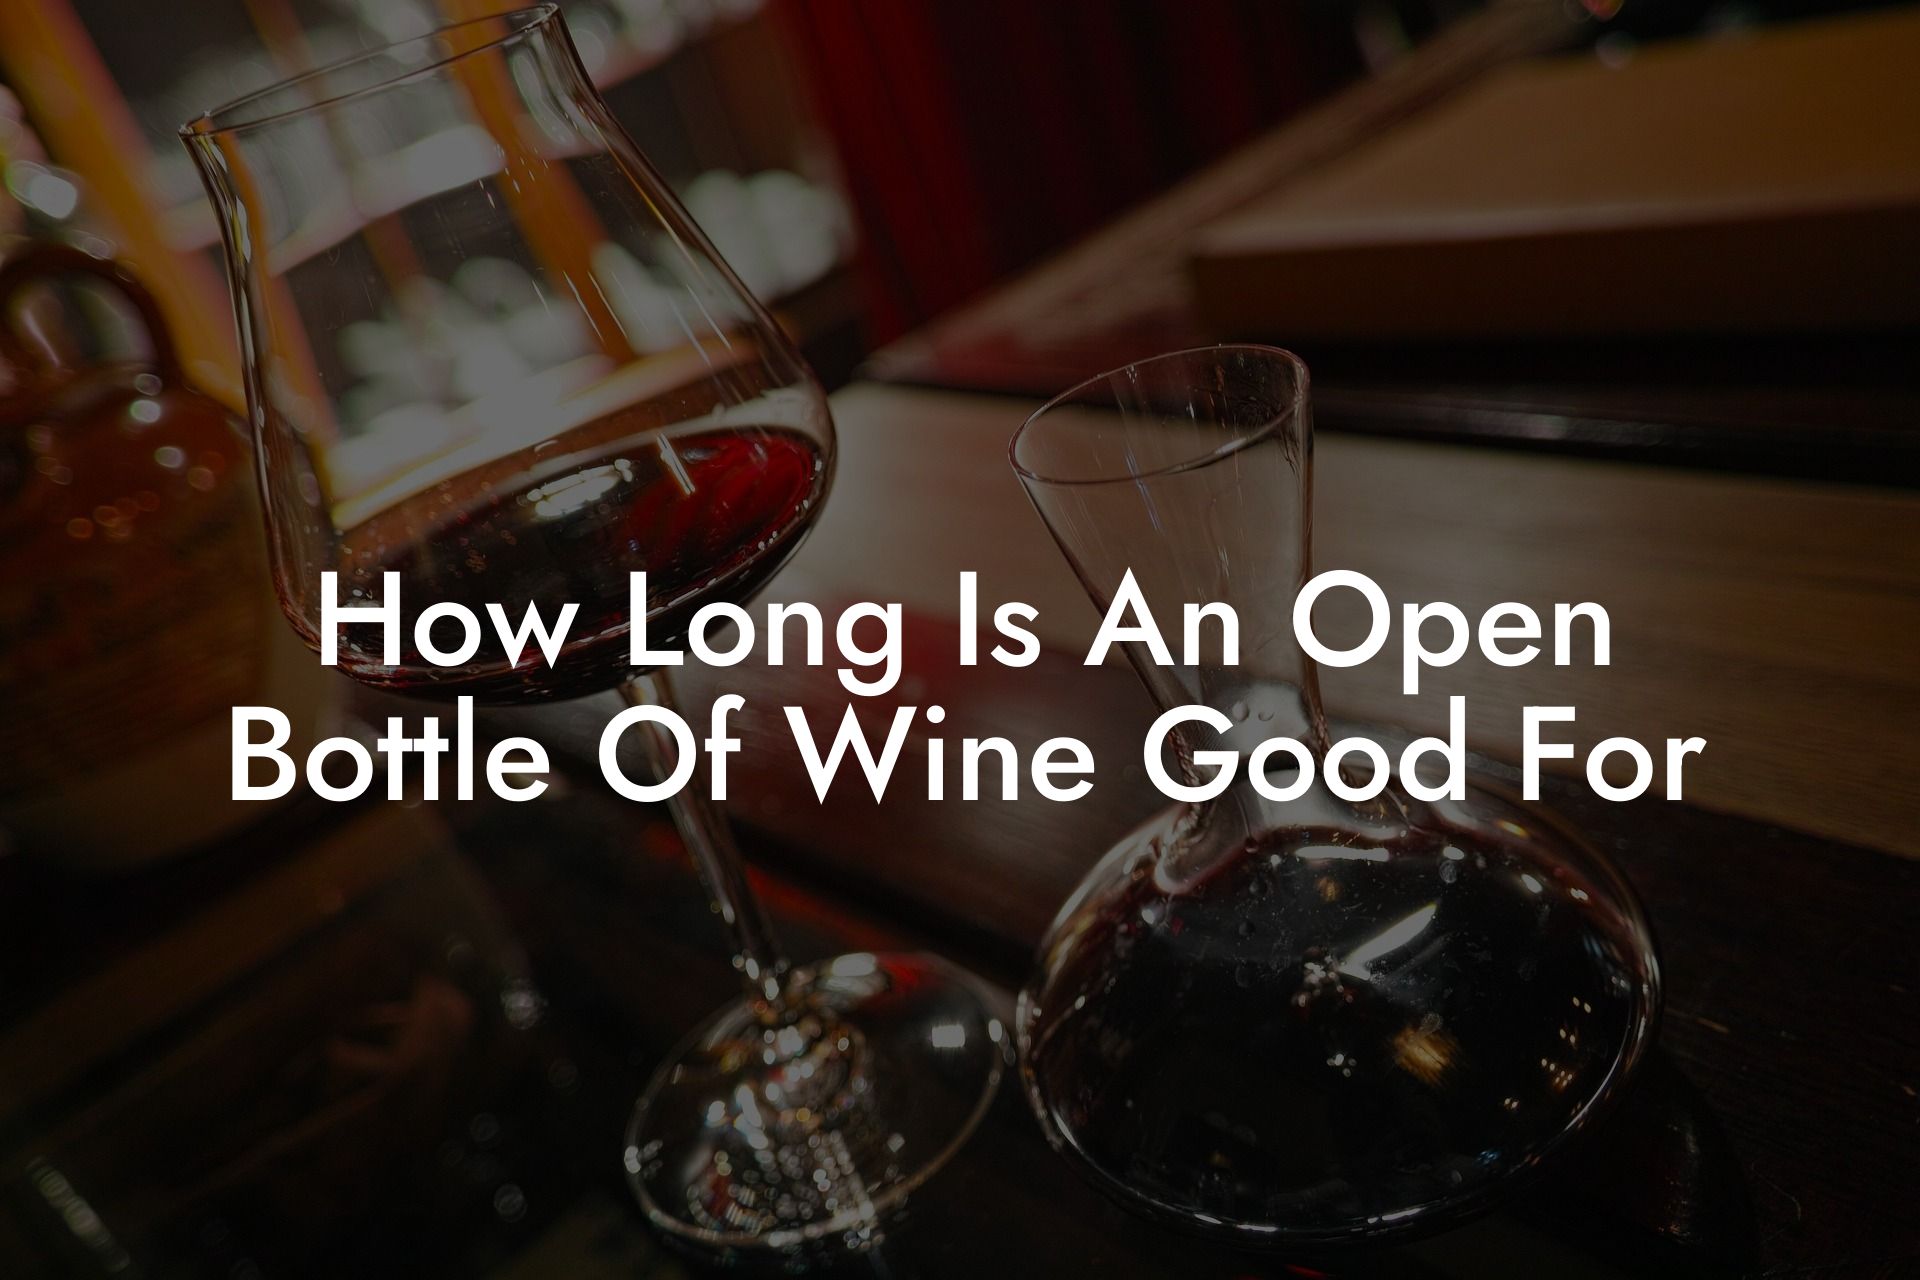 How Long Is An Open Bottle Of Wine Good For